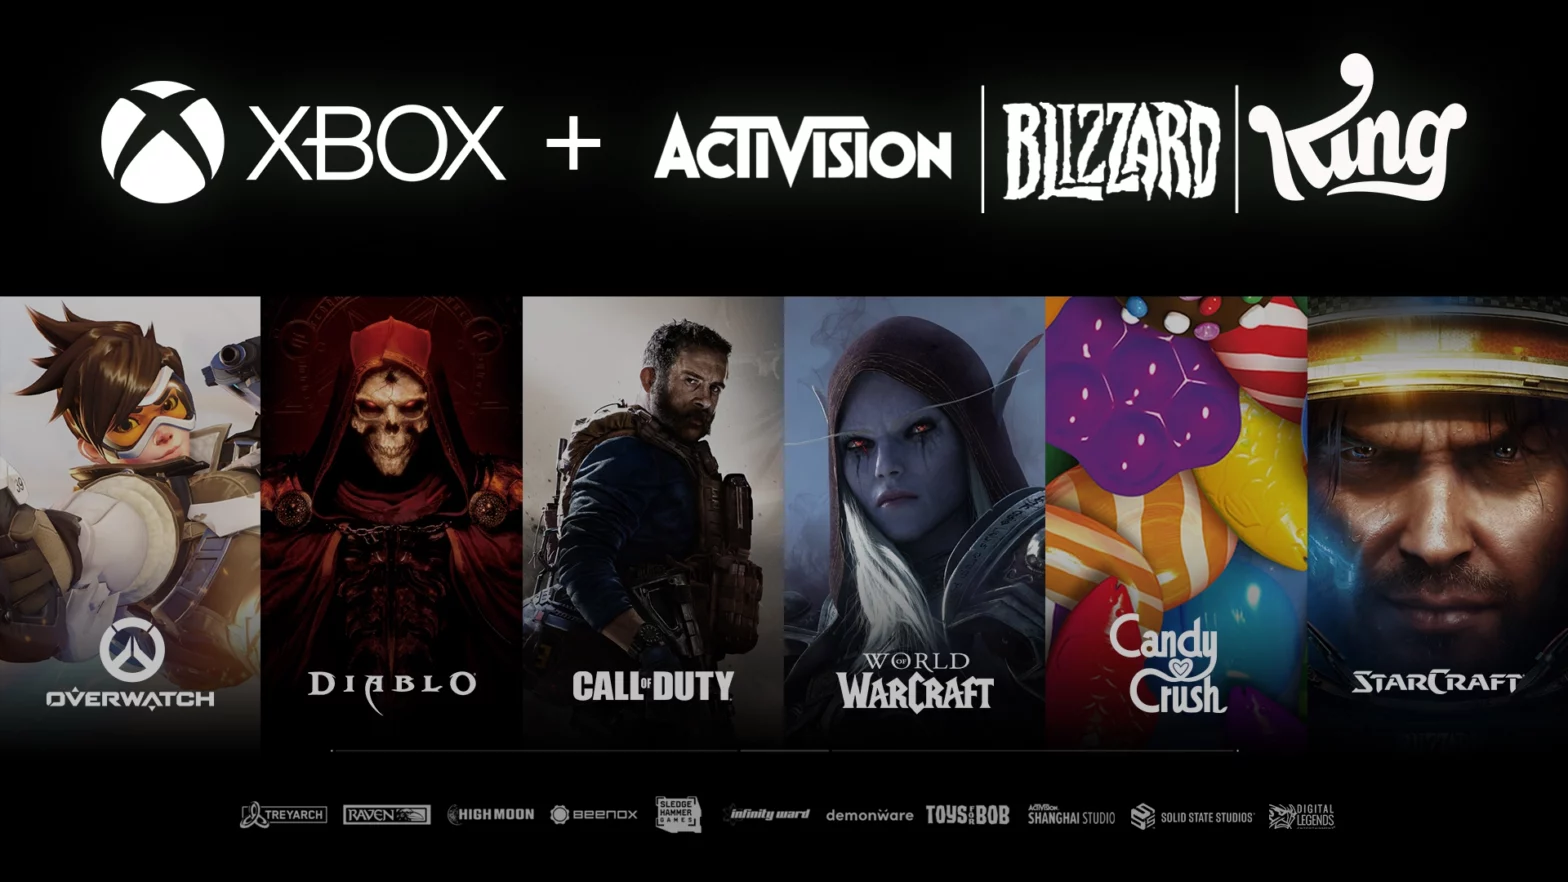 Microsoft-Activision deal October update: Brazil's CADE approval, dedicated  acquisition page, and CMA March 2023 final report